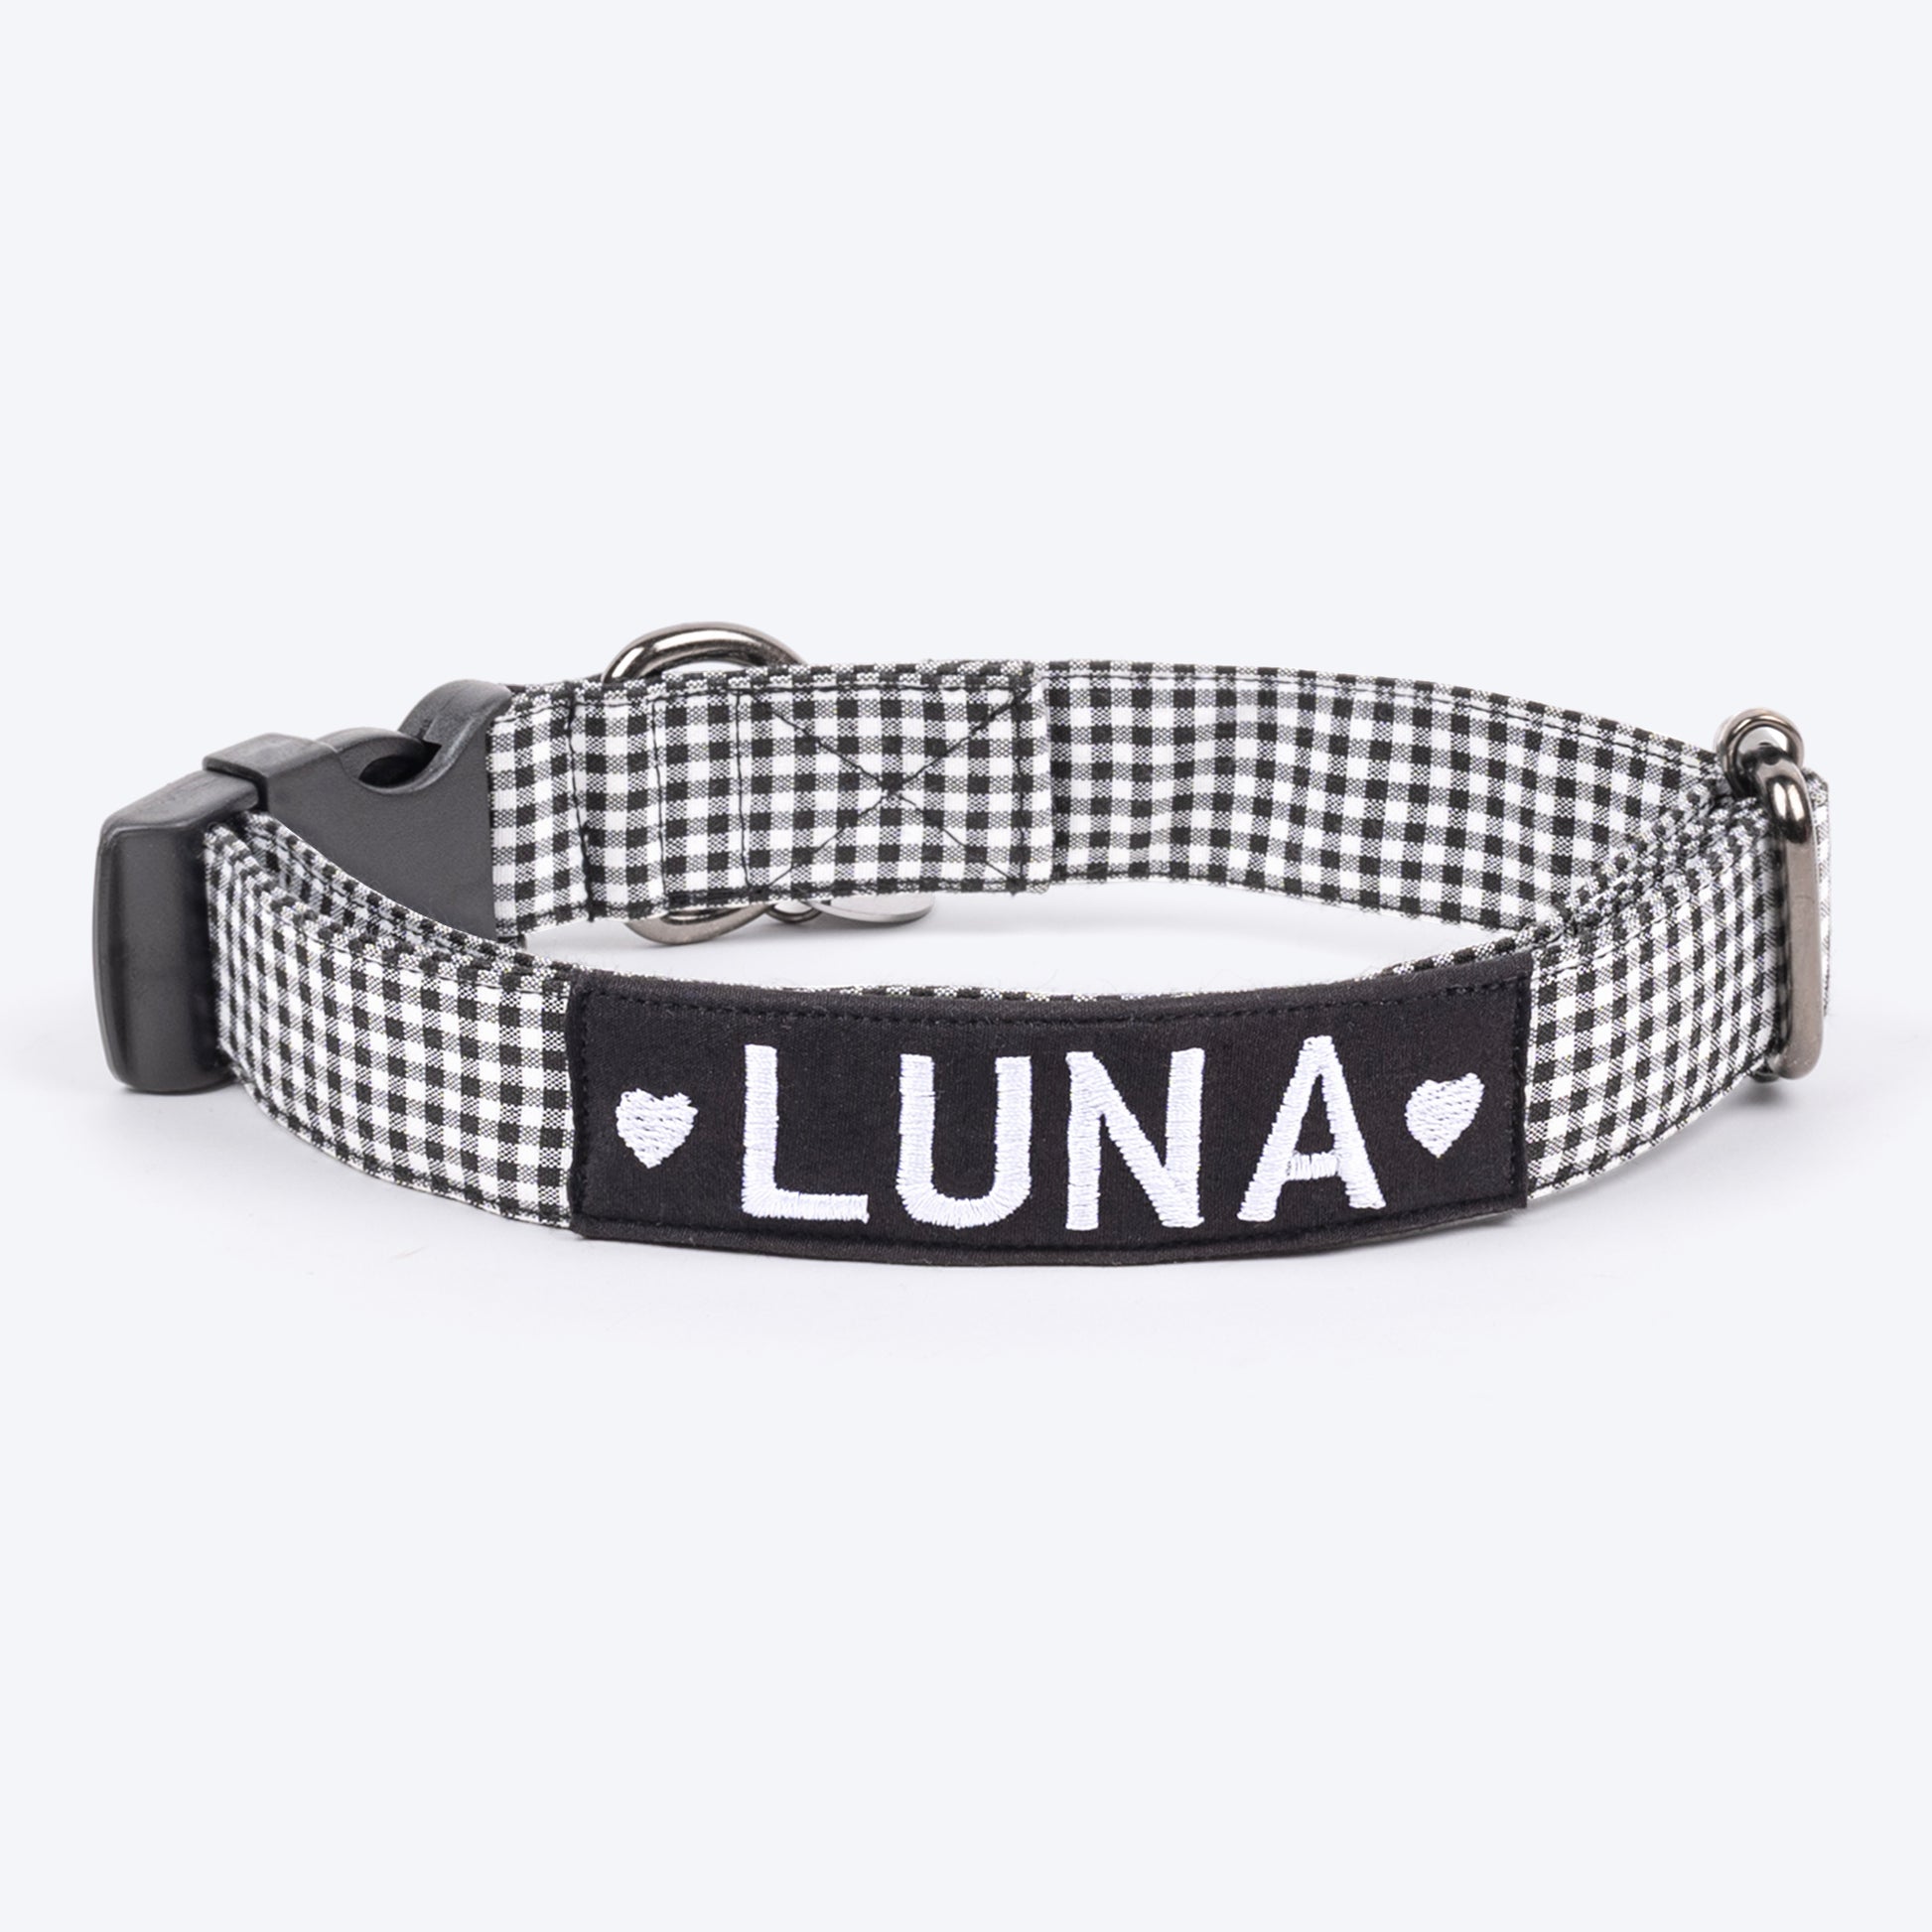 HUFT Personalised Gingham Fabric Collar With Bow Tie For Dogs - Black - Heads Up For Tails